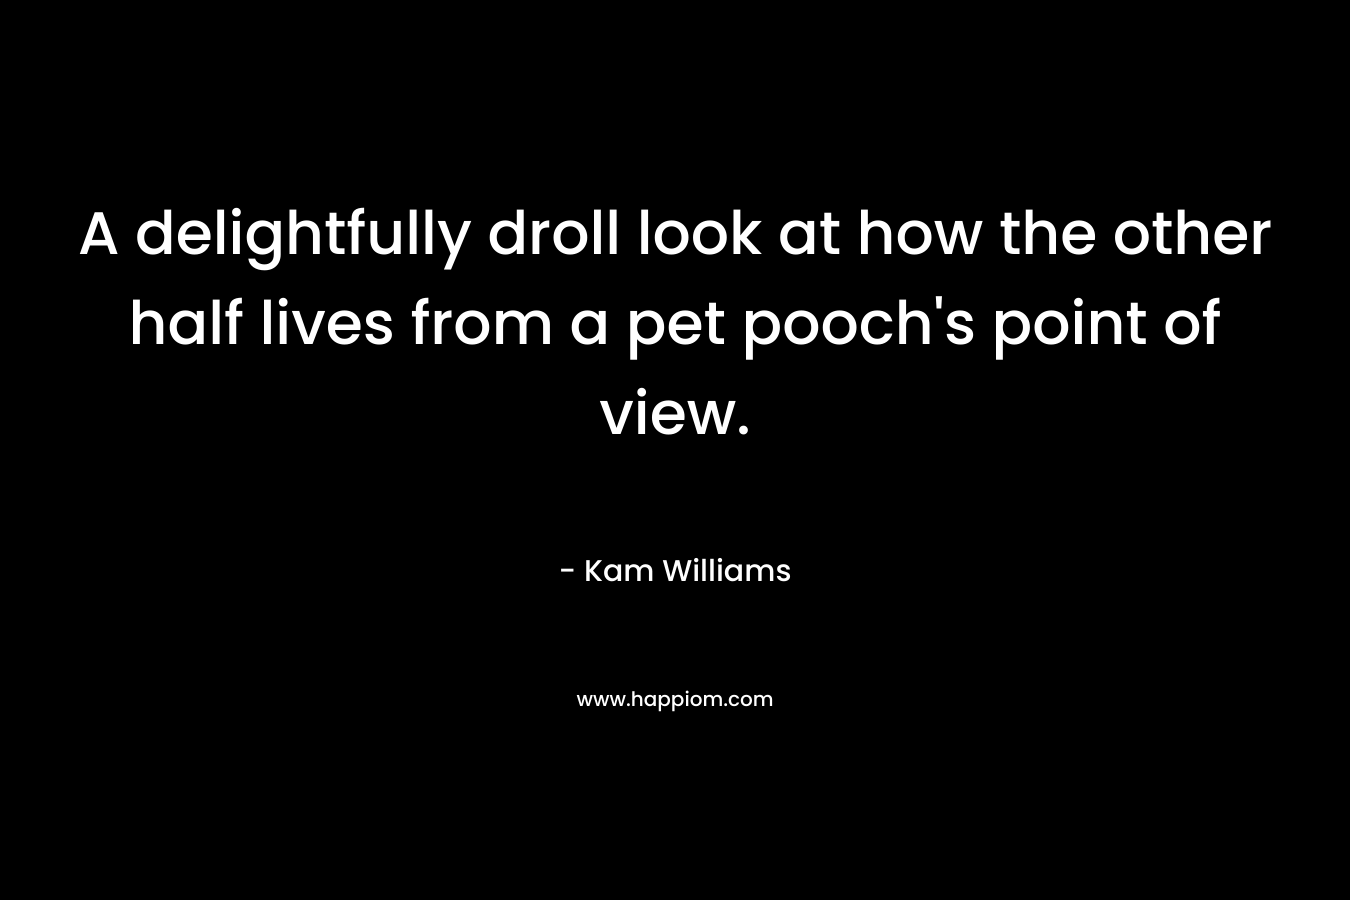 A delightfully droll look at how the other half lives from a pet pooch’s point of view. – Kam Williams